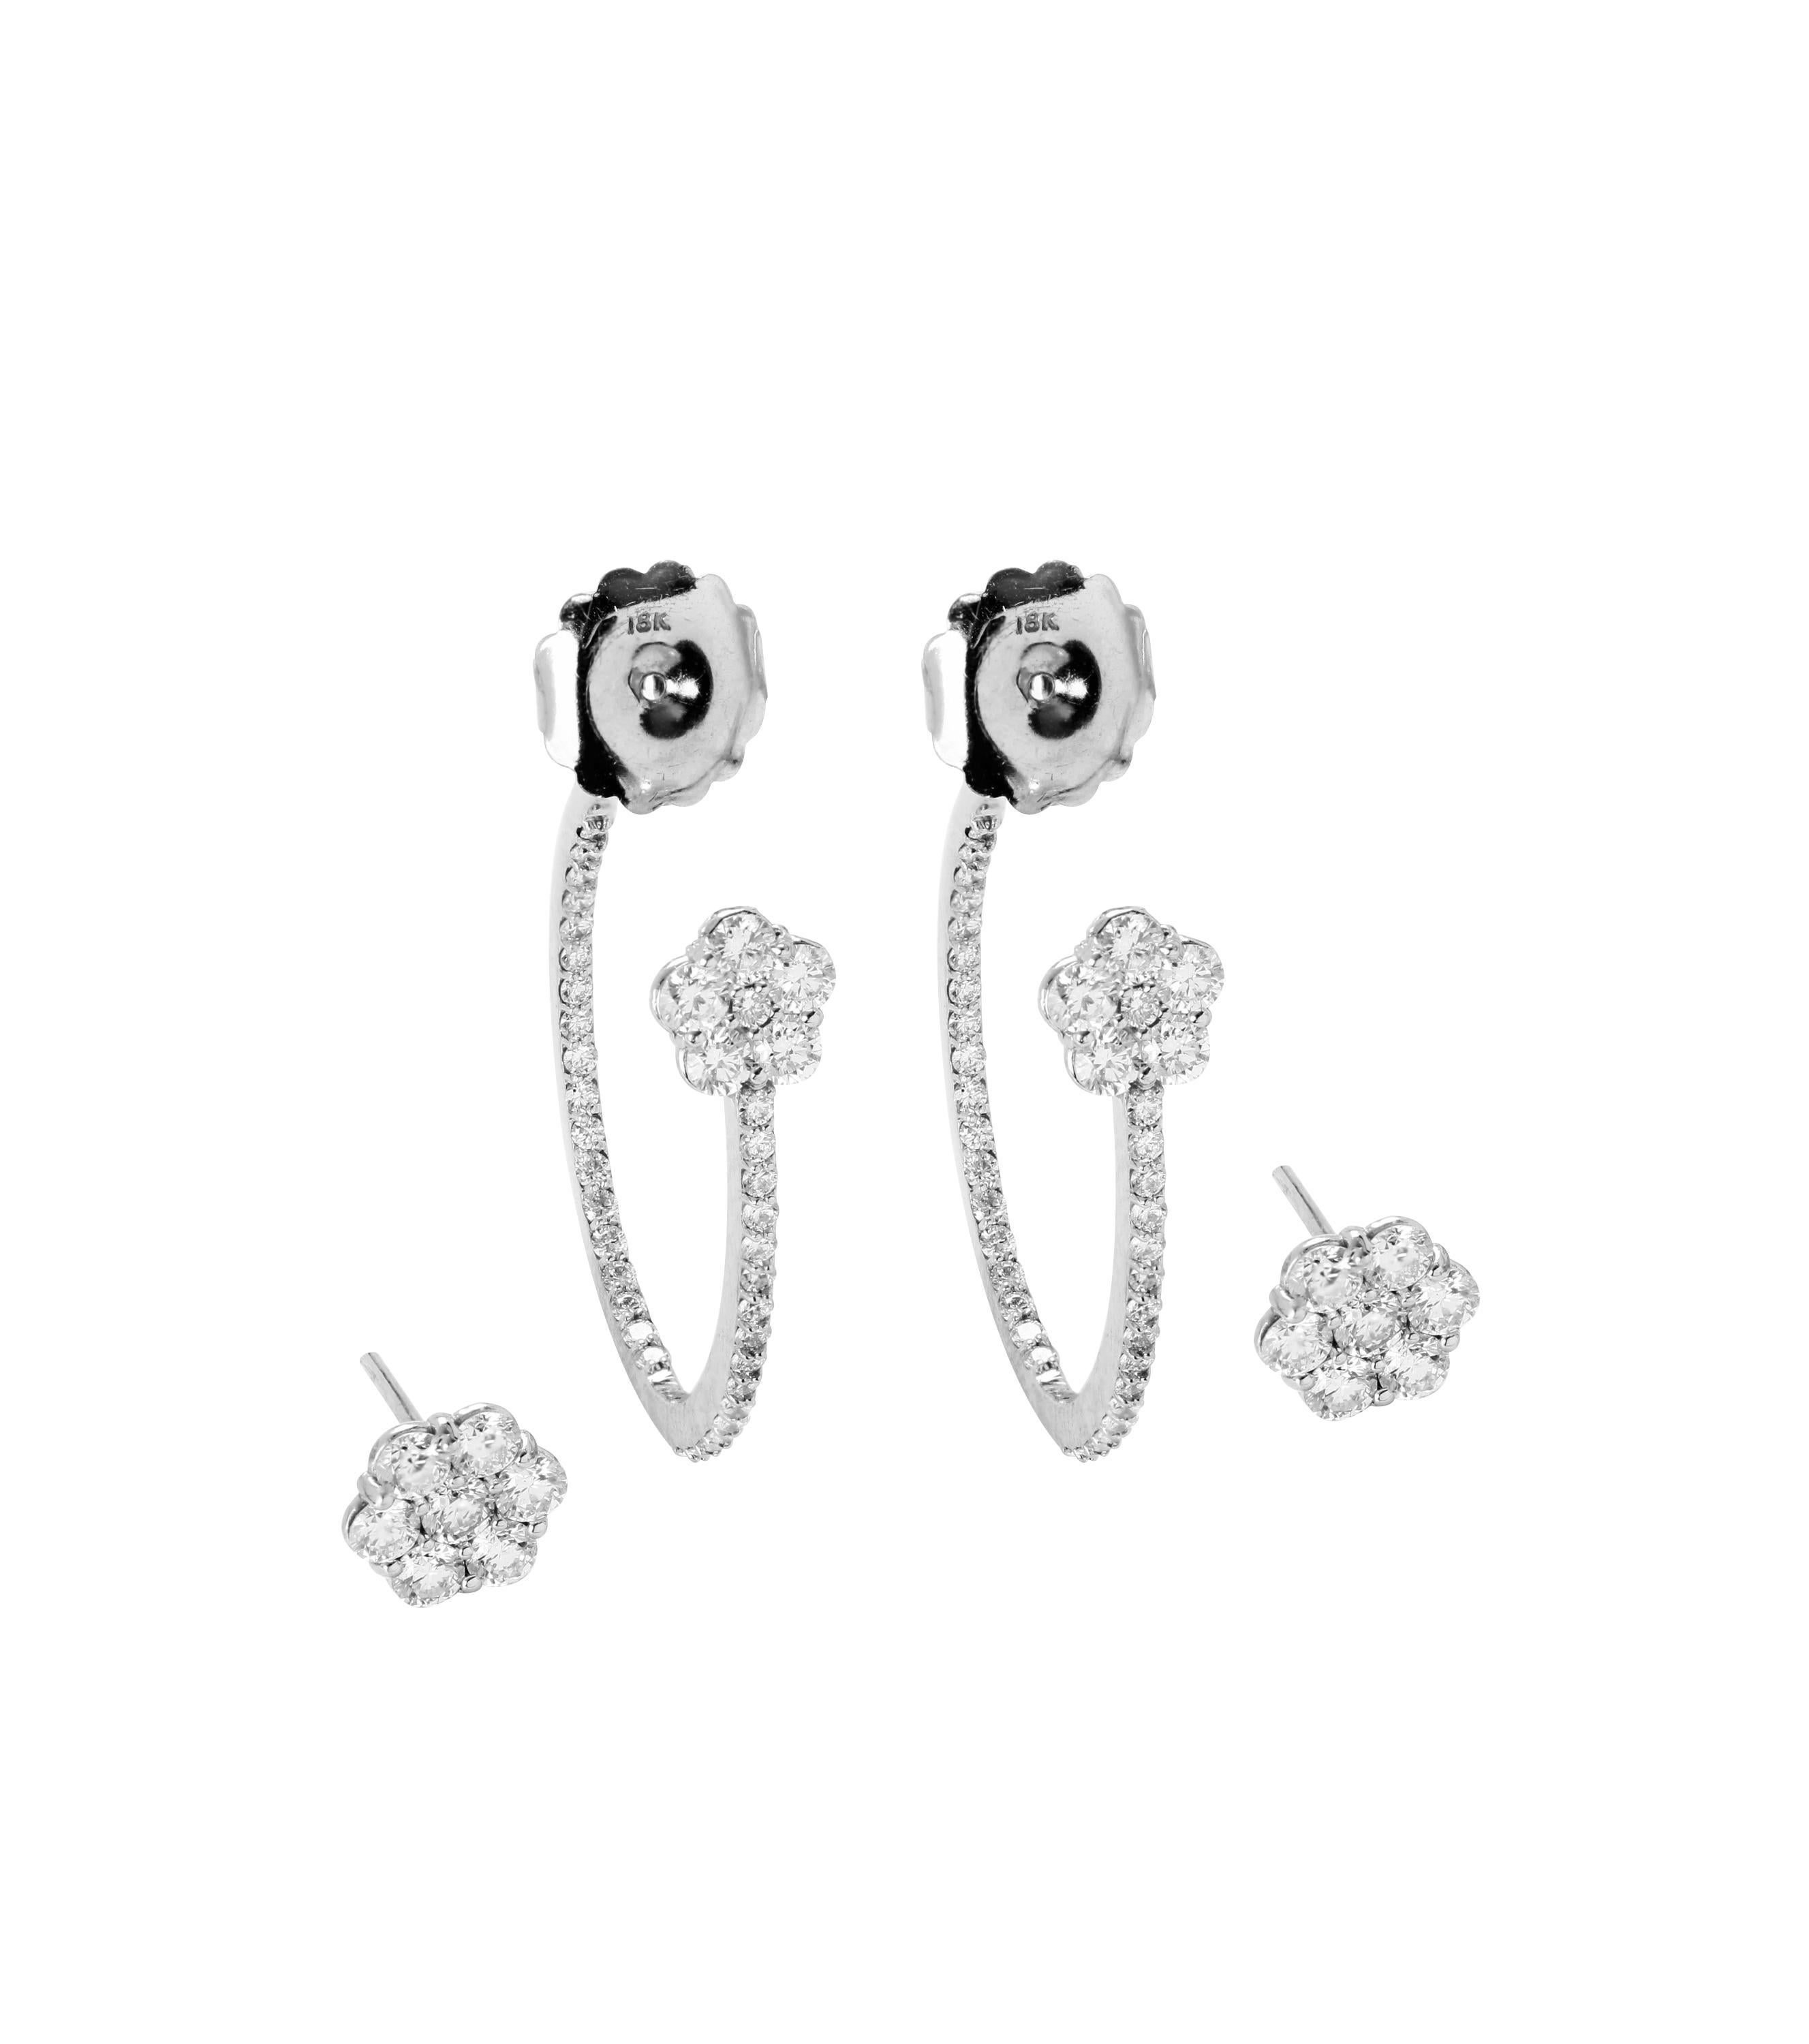 18K White Gold Two Piece Earrings with White Diamond Clusters

Earrings are two piece earrings meaning the diamond clusters in center are worn from front while rest of earrings are worn from back.

3.47ct. G Color, VS Clarity White Diamonds are set